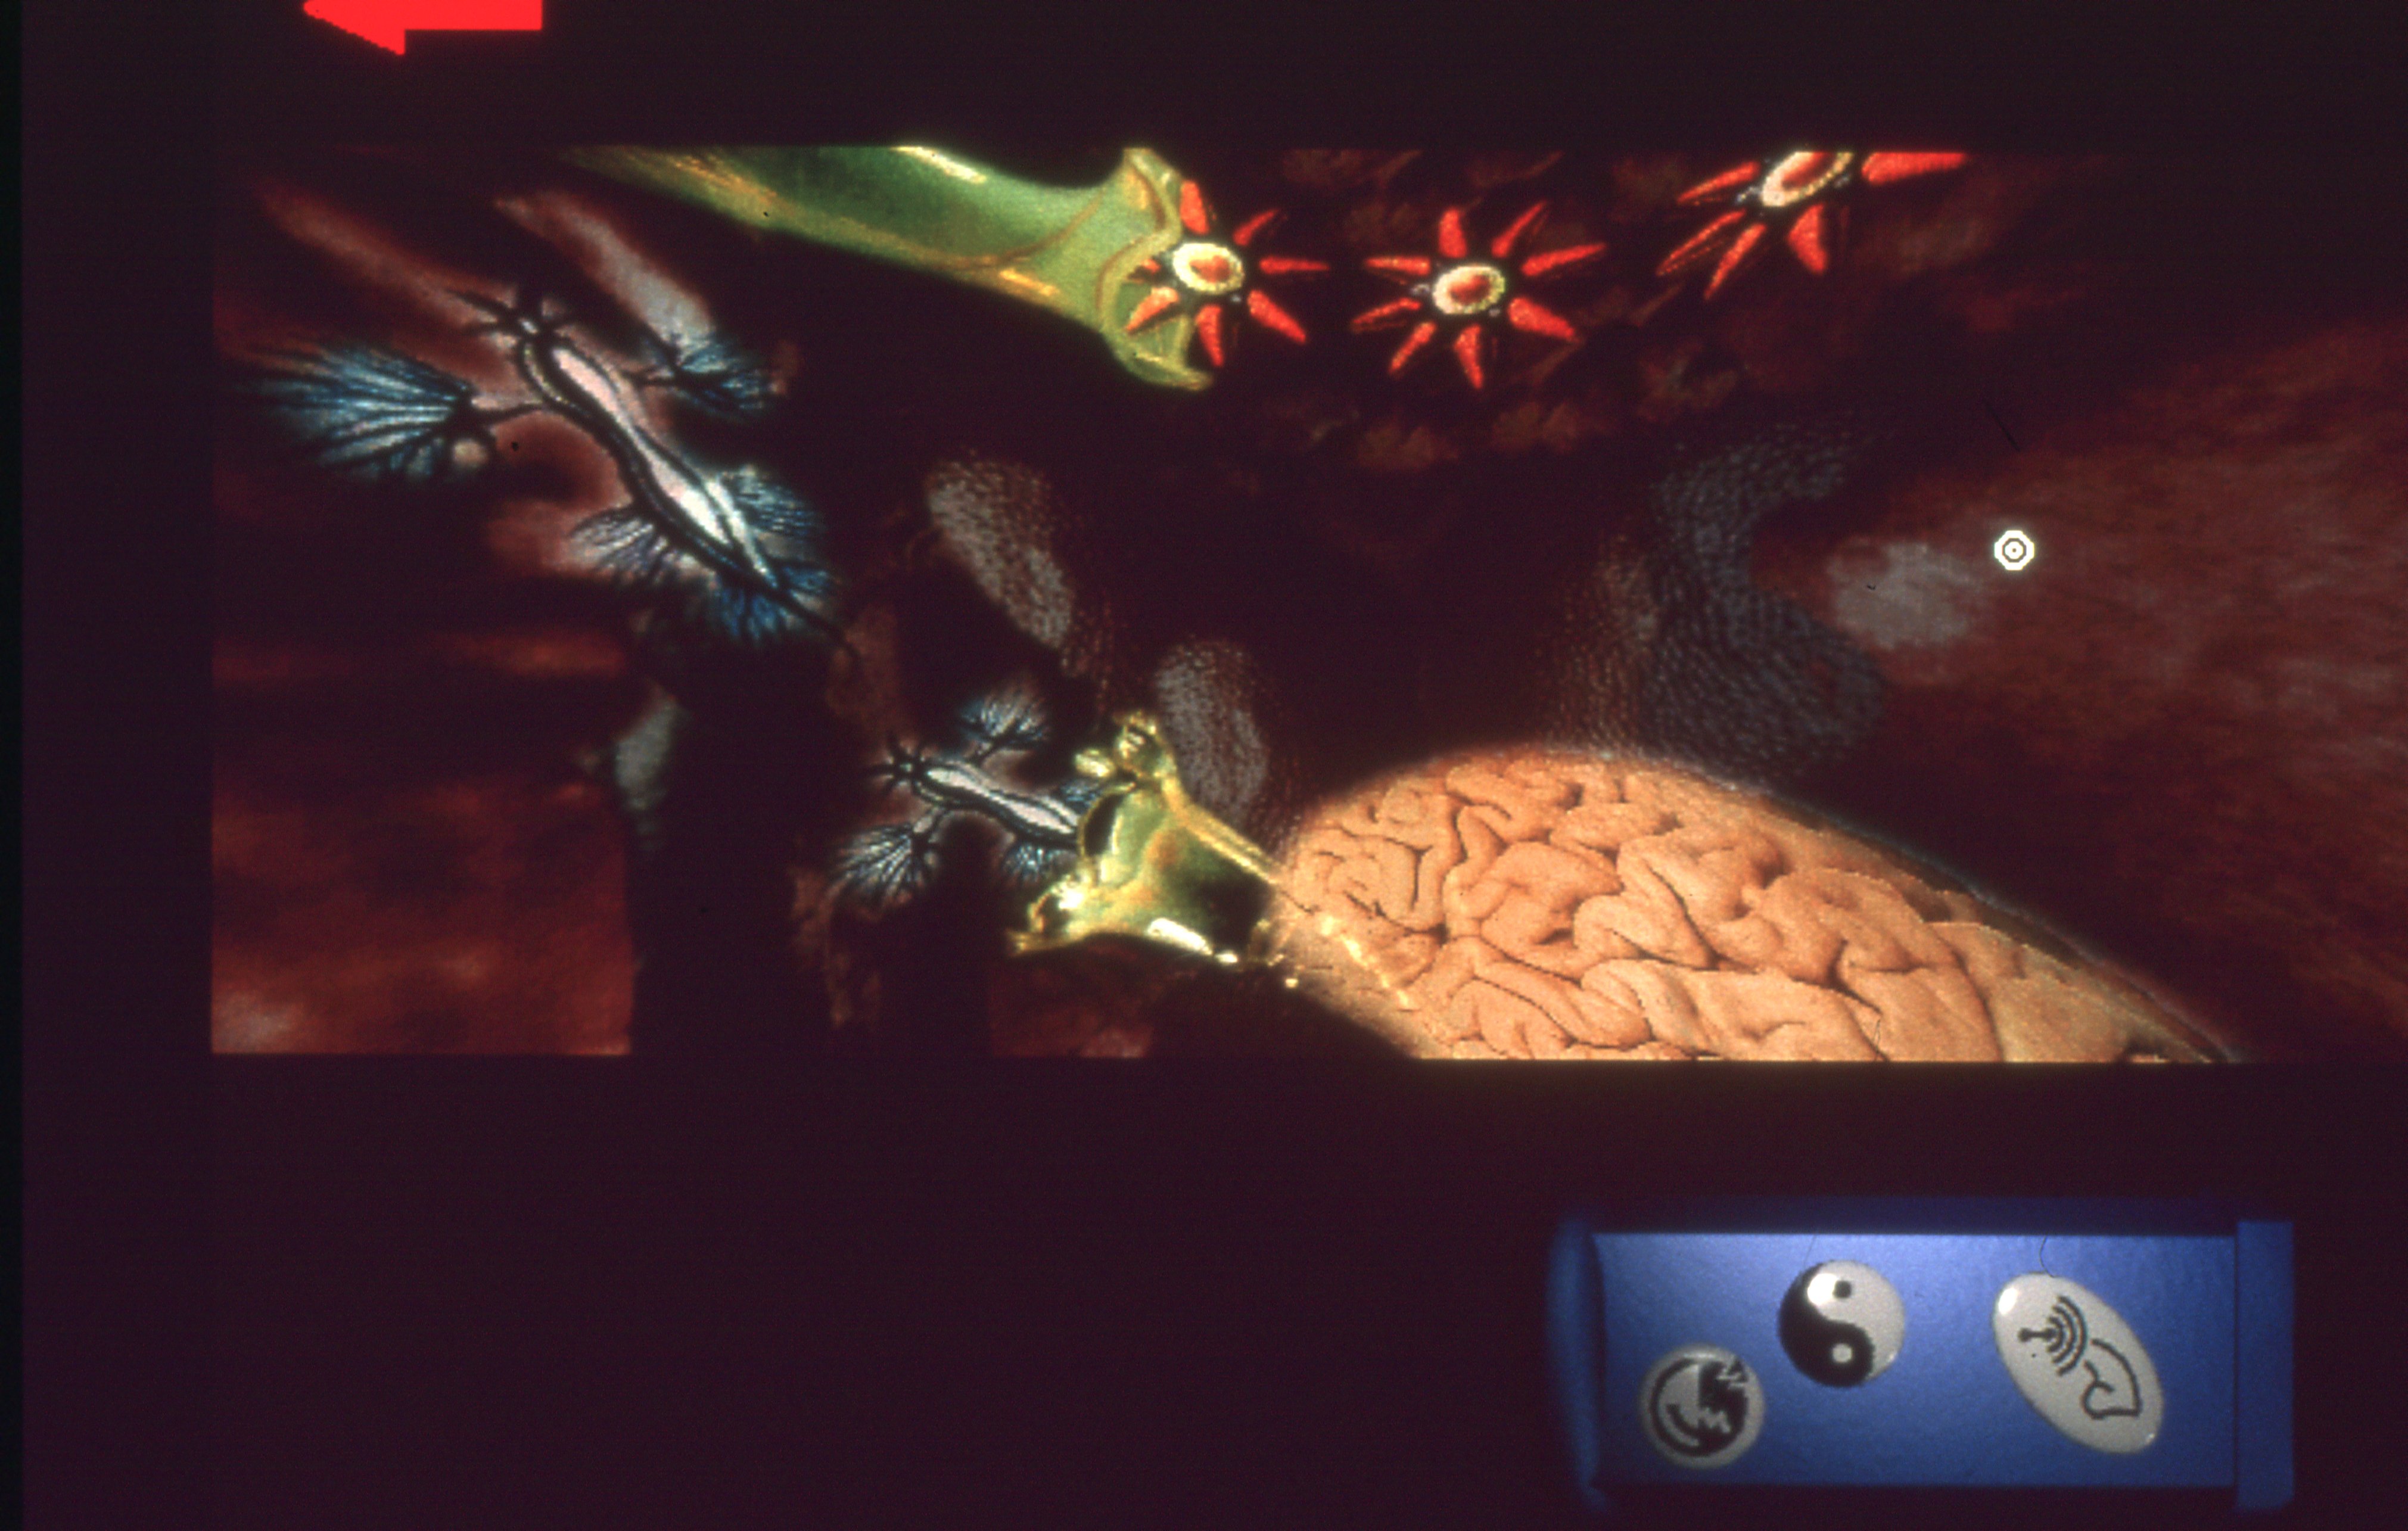 An image of a virtual scene inside a darkly lit red space showing a human brain, bacteria-like spaceships, and red star fish aliens flying out of a green organic tube. A red arrow is on the top left.